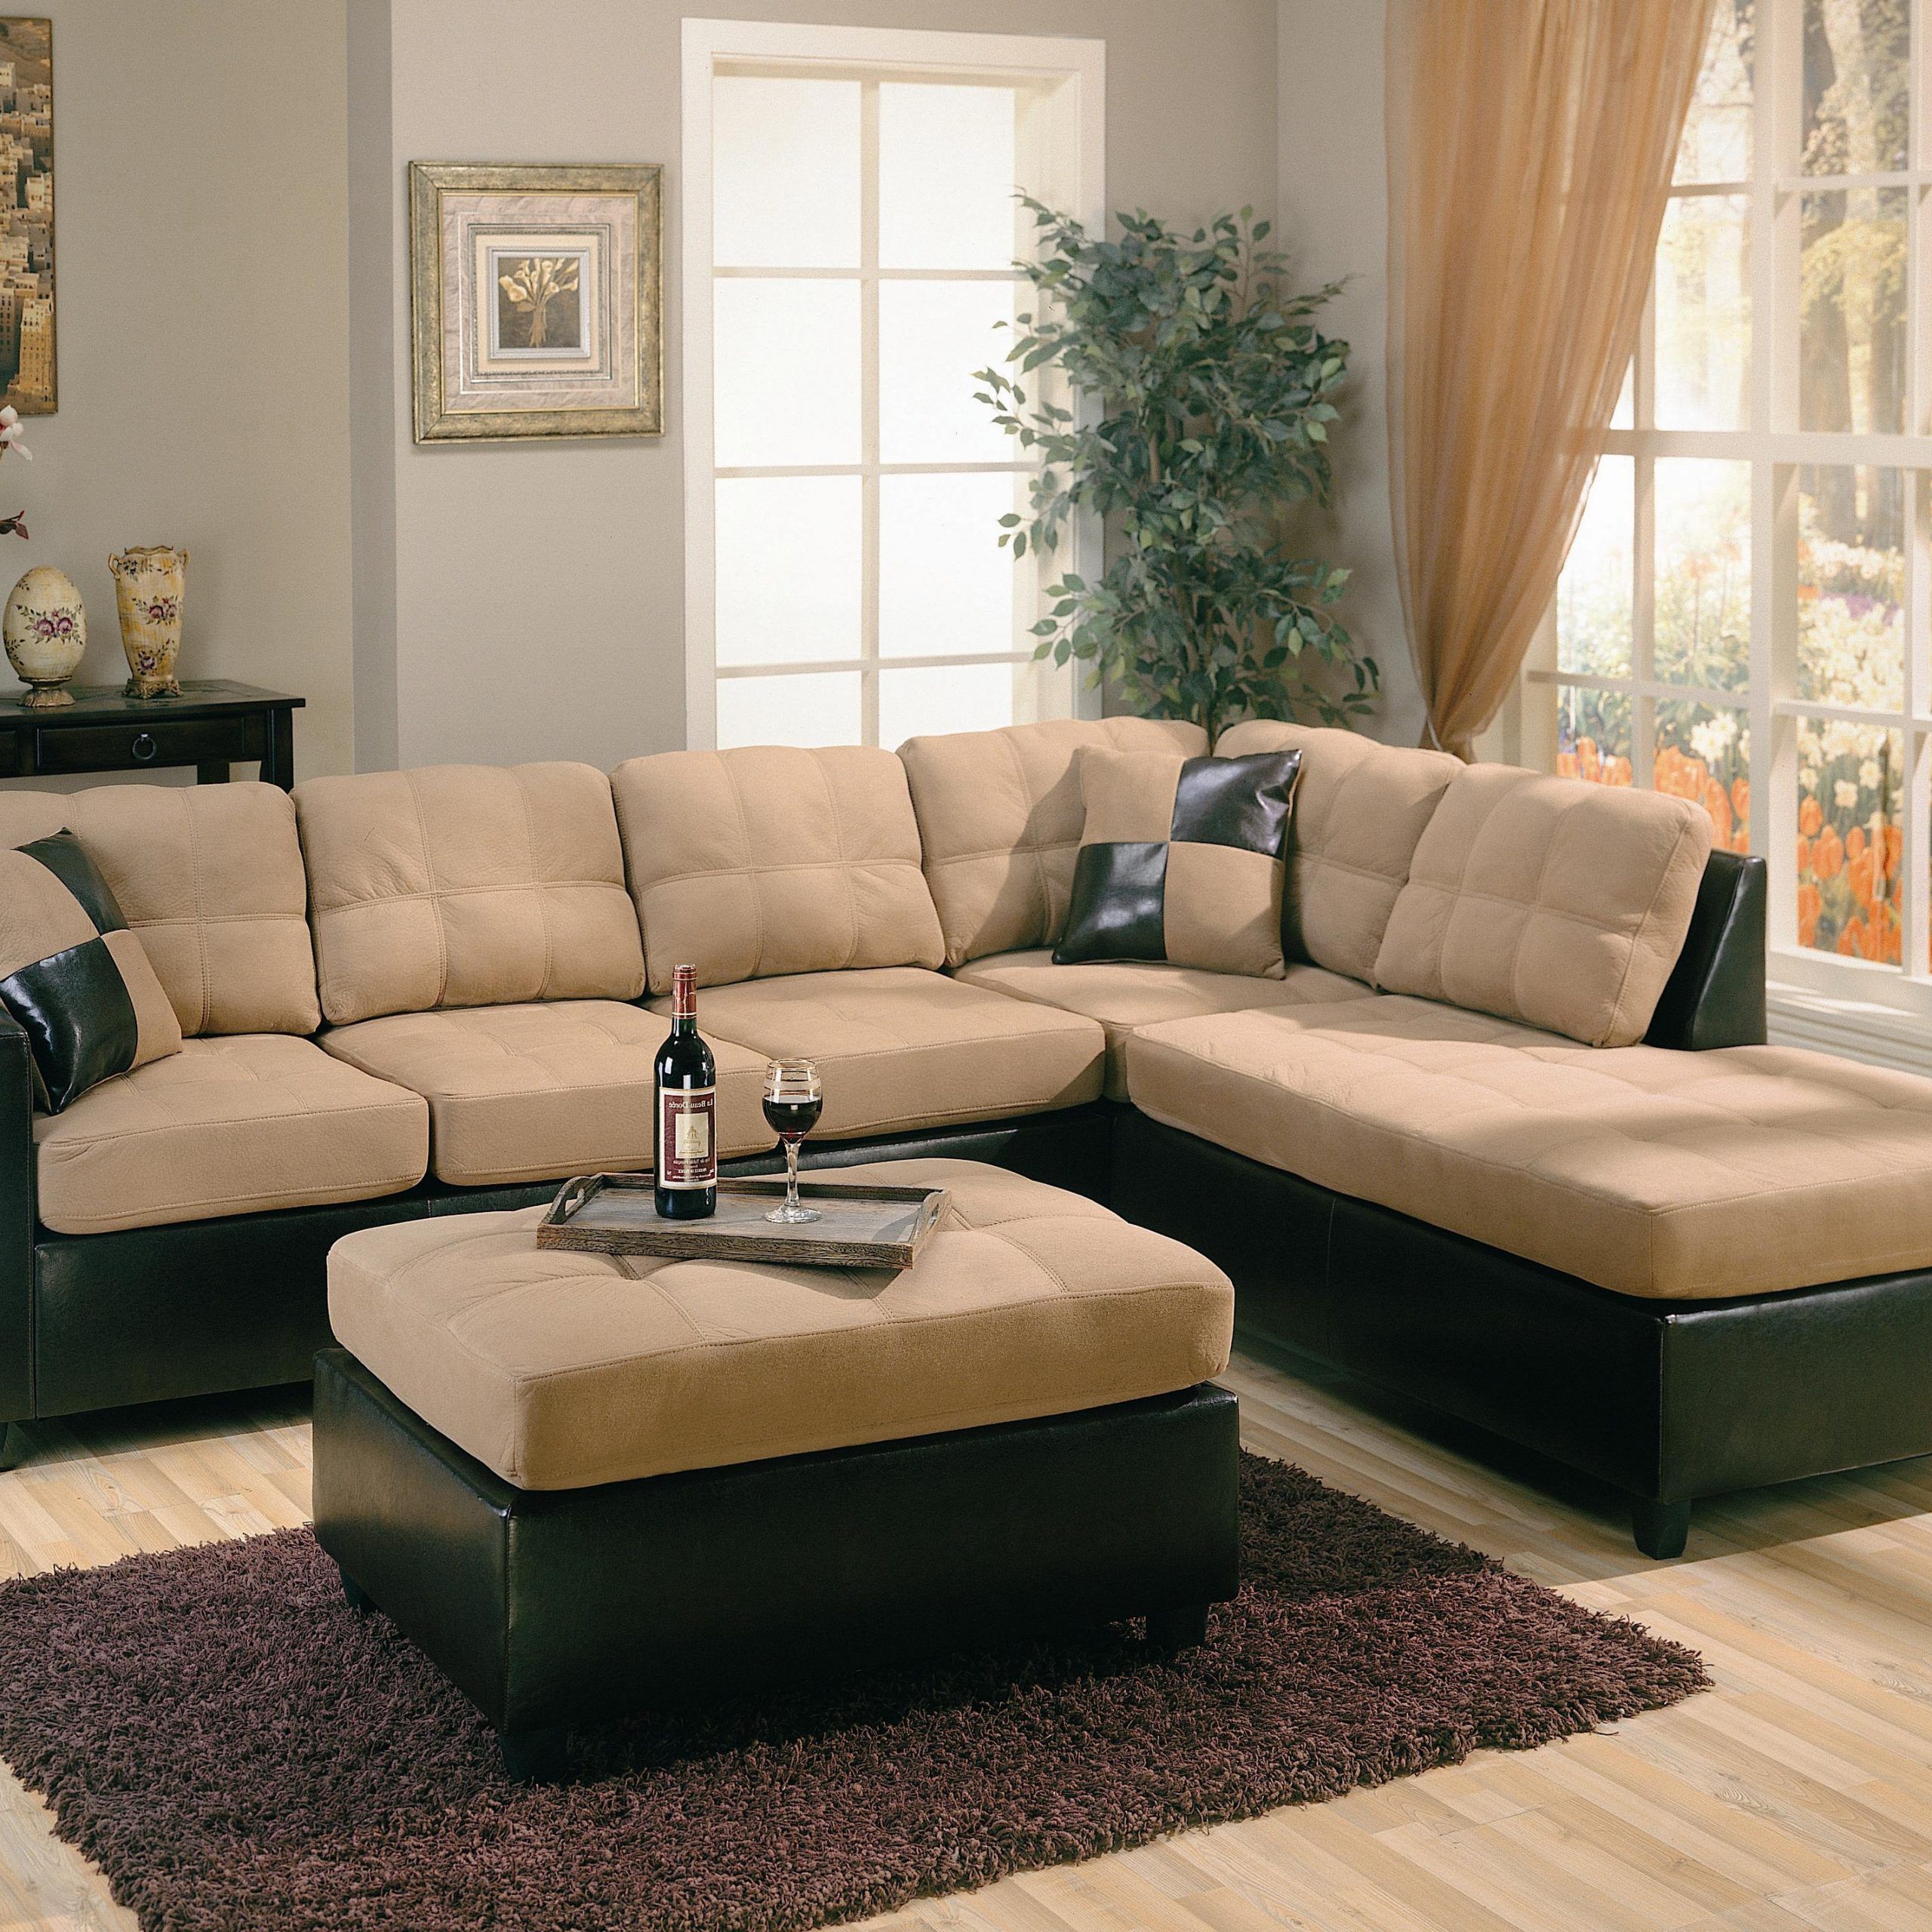 Page Title Inside Bonded Leather All In One Sectional Sofas With Ottoman And 2 Pillows Brown (View 8 of 15)